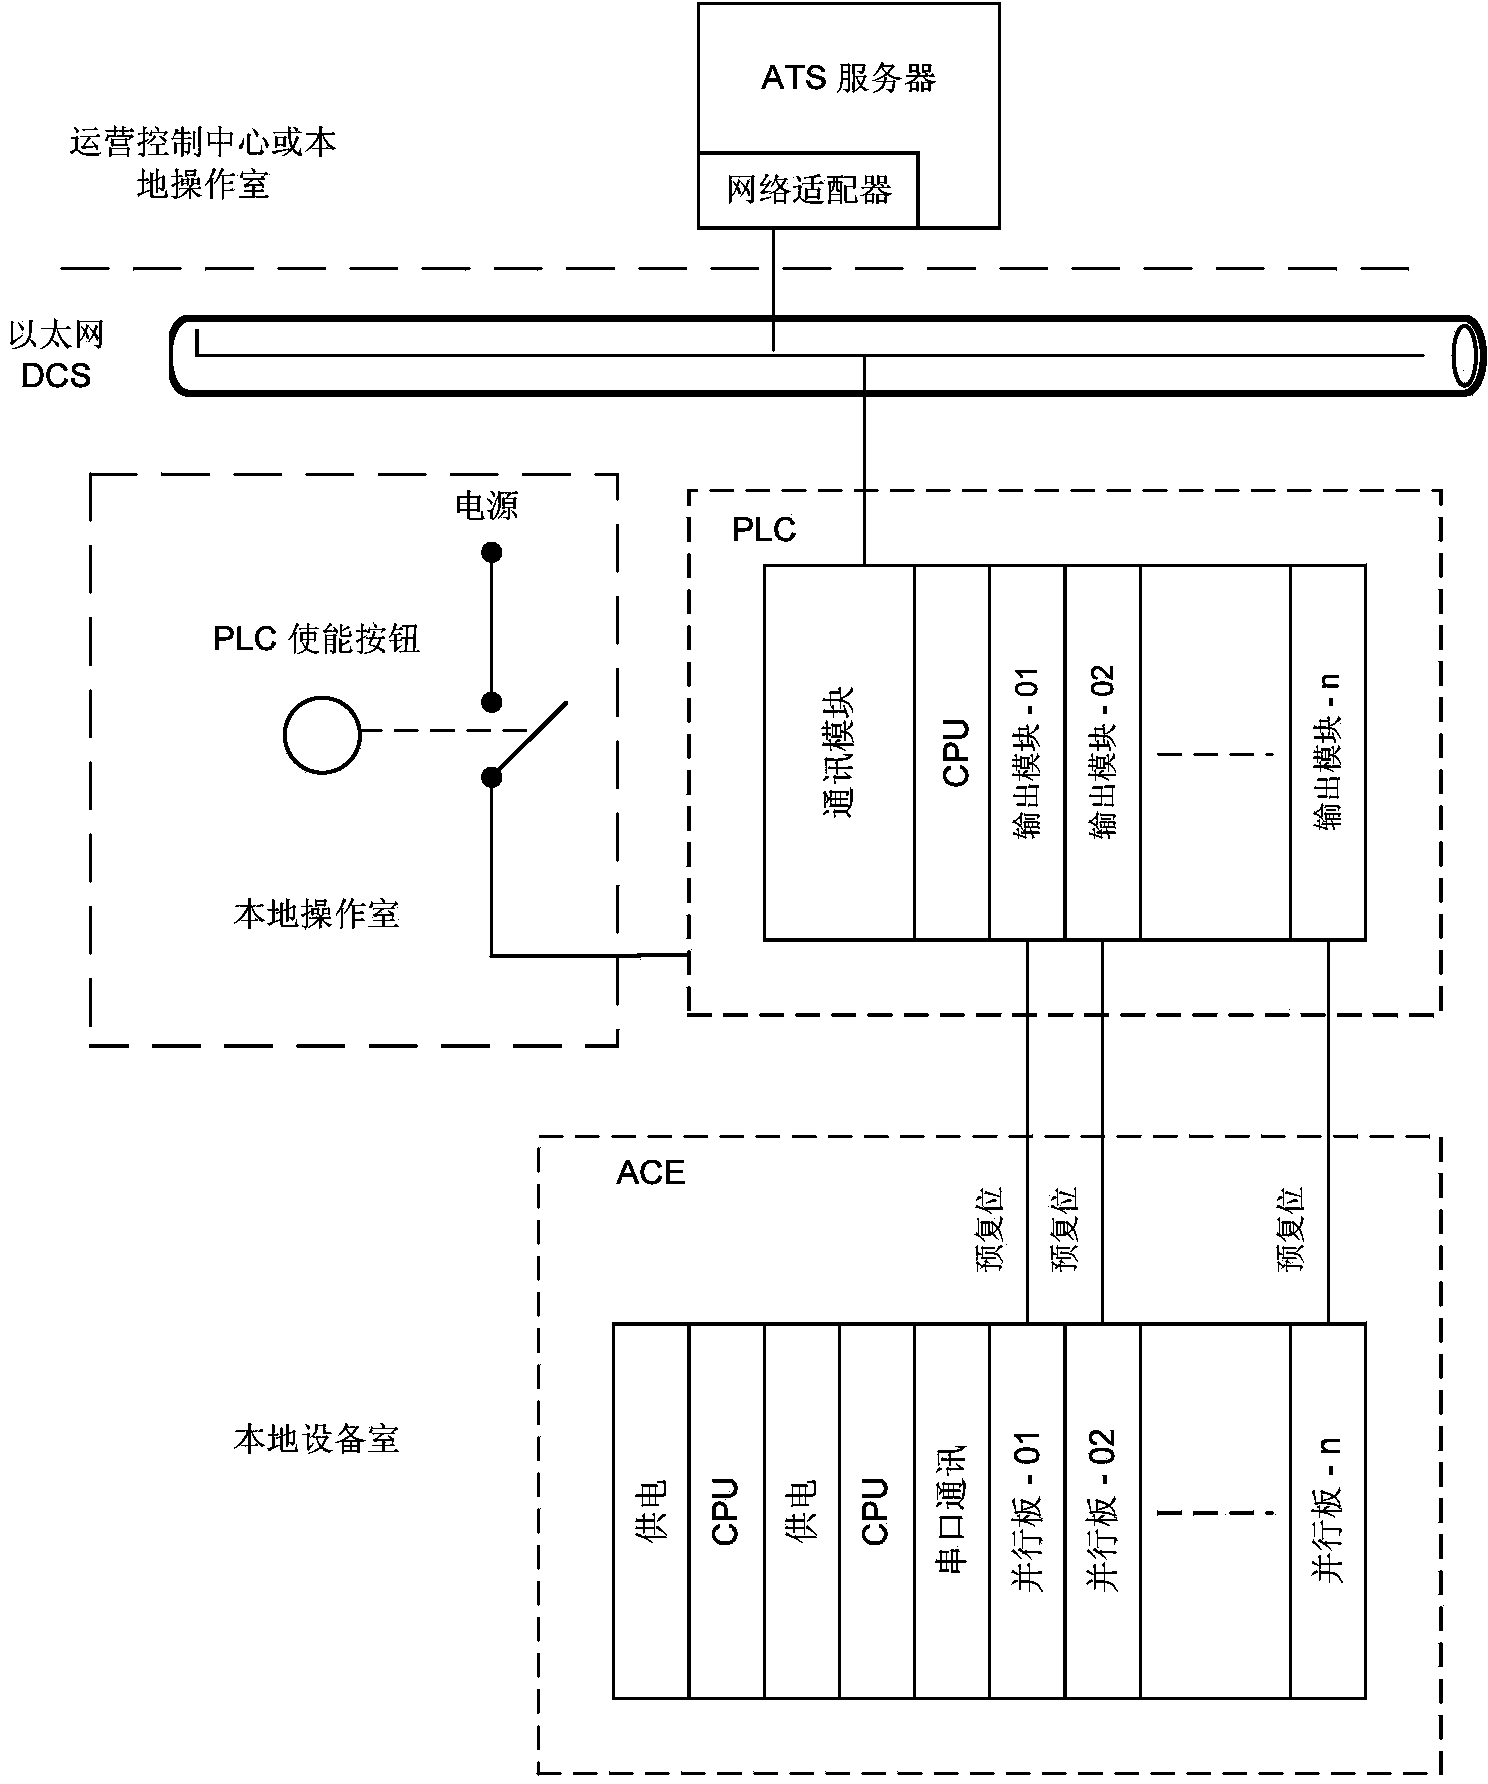 Remote axle-counting preliminary reset system and remote axle-counting preliminary reset method